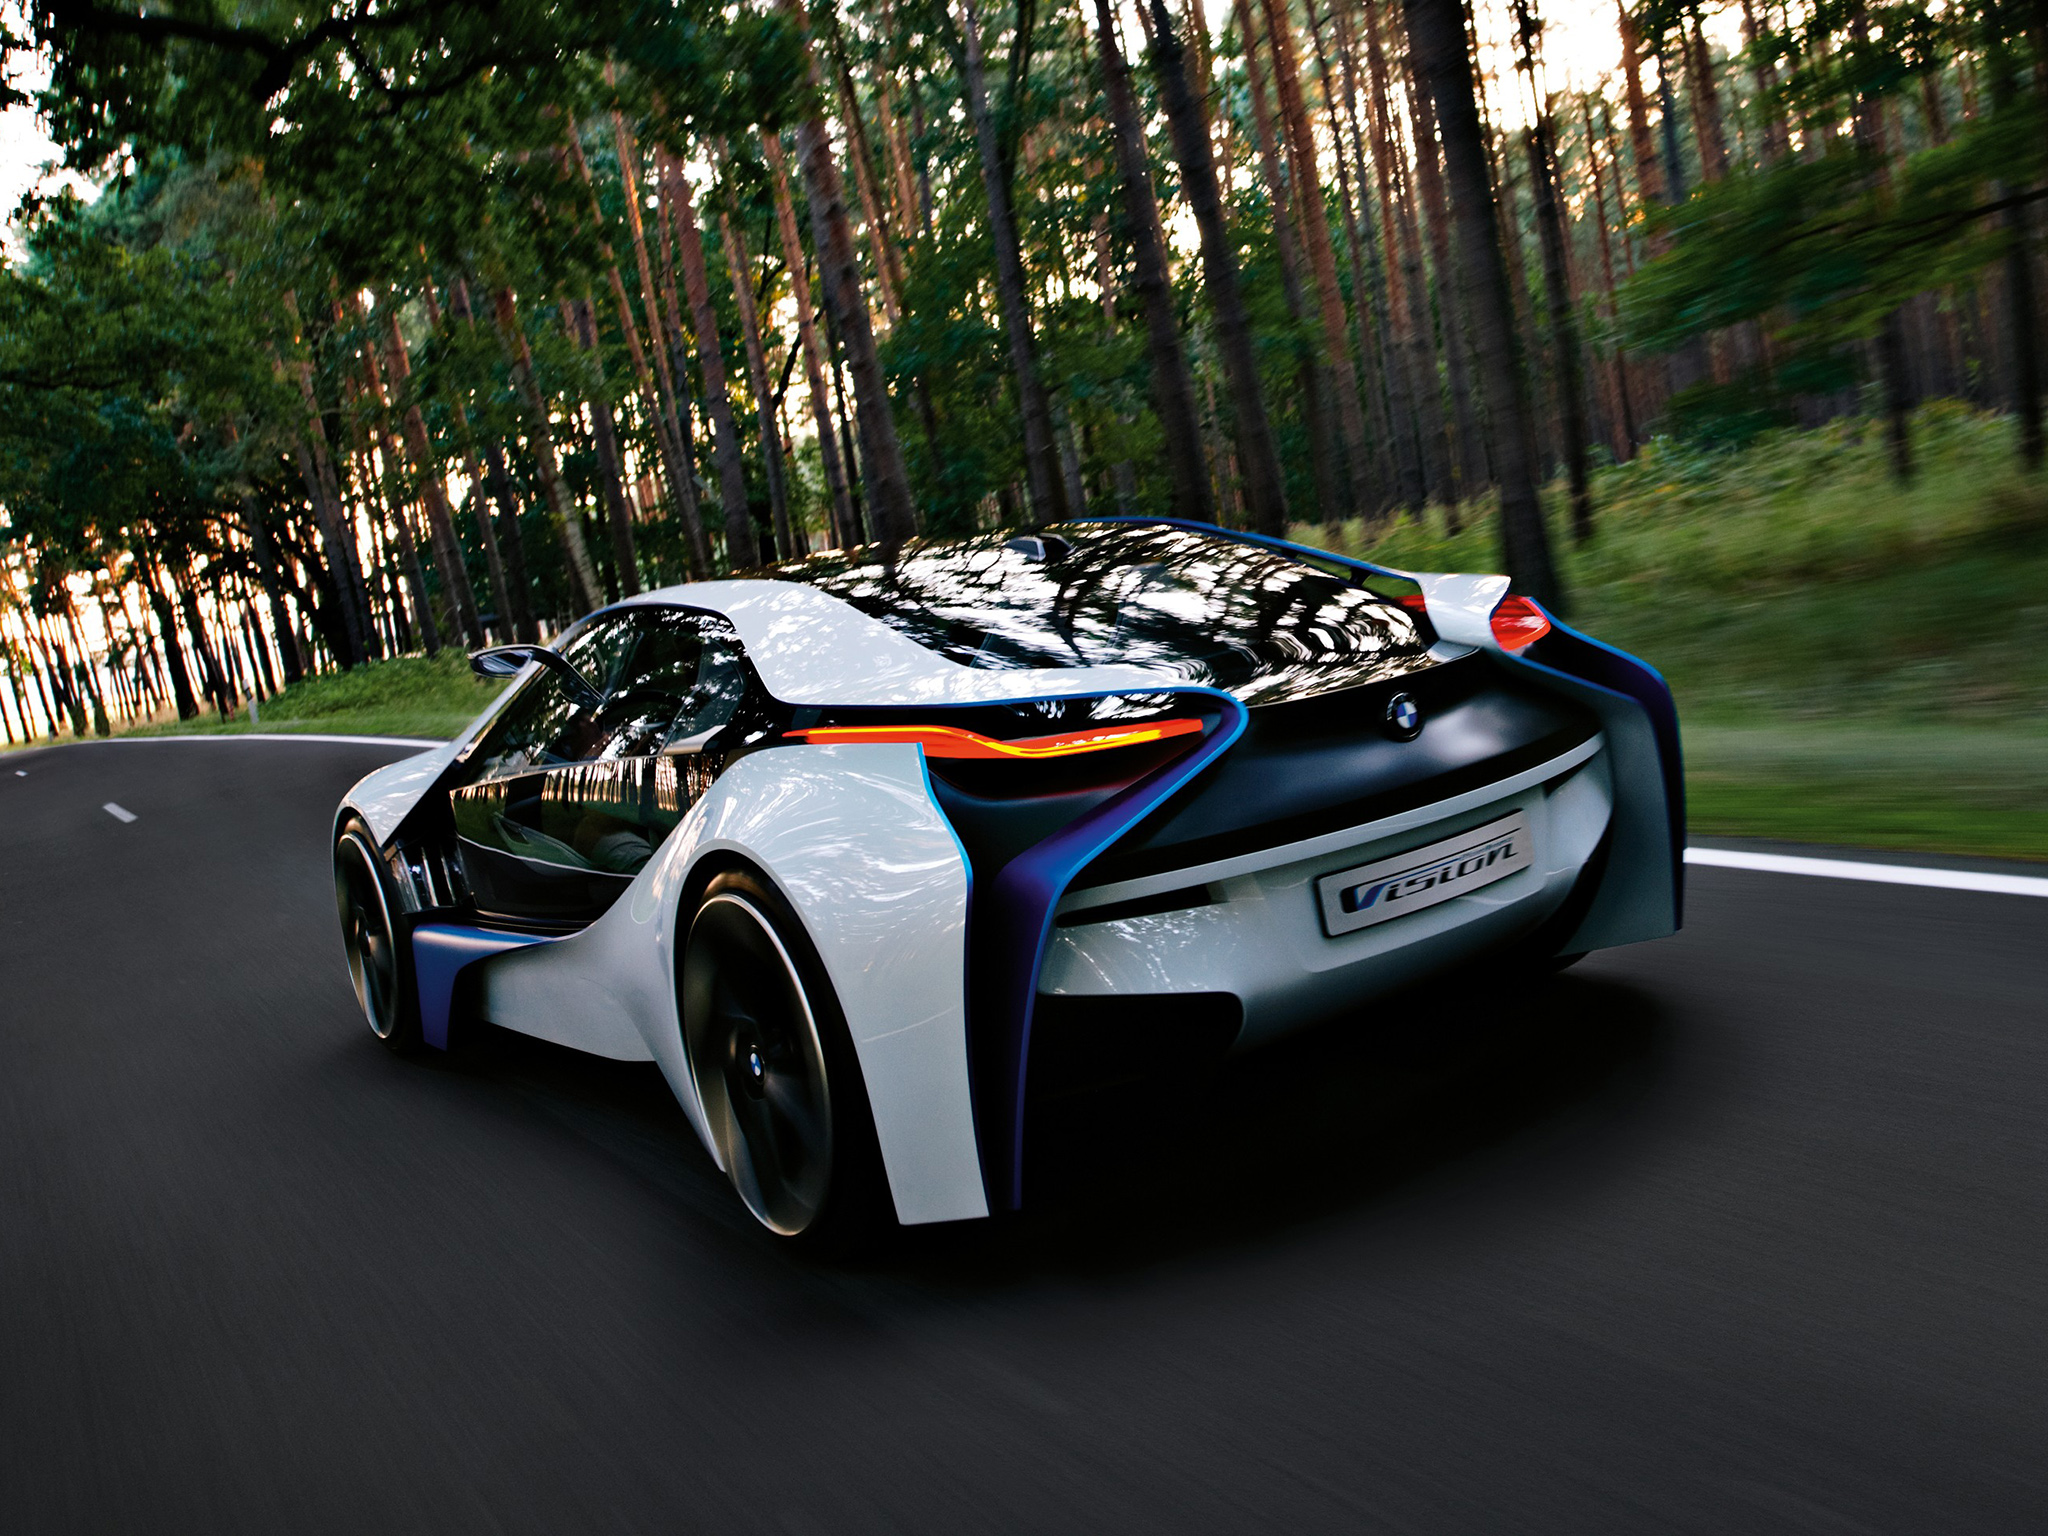 Bmw I Coupe Side Wallpaper
 Bmw I Hd Wallpapers Backgrounds - Bmw Vision Efficientdynamics Concept - HD Wallpaper 